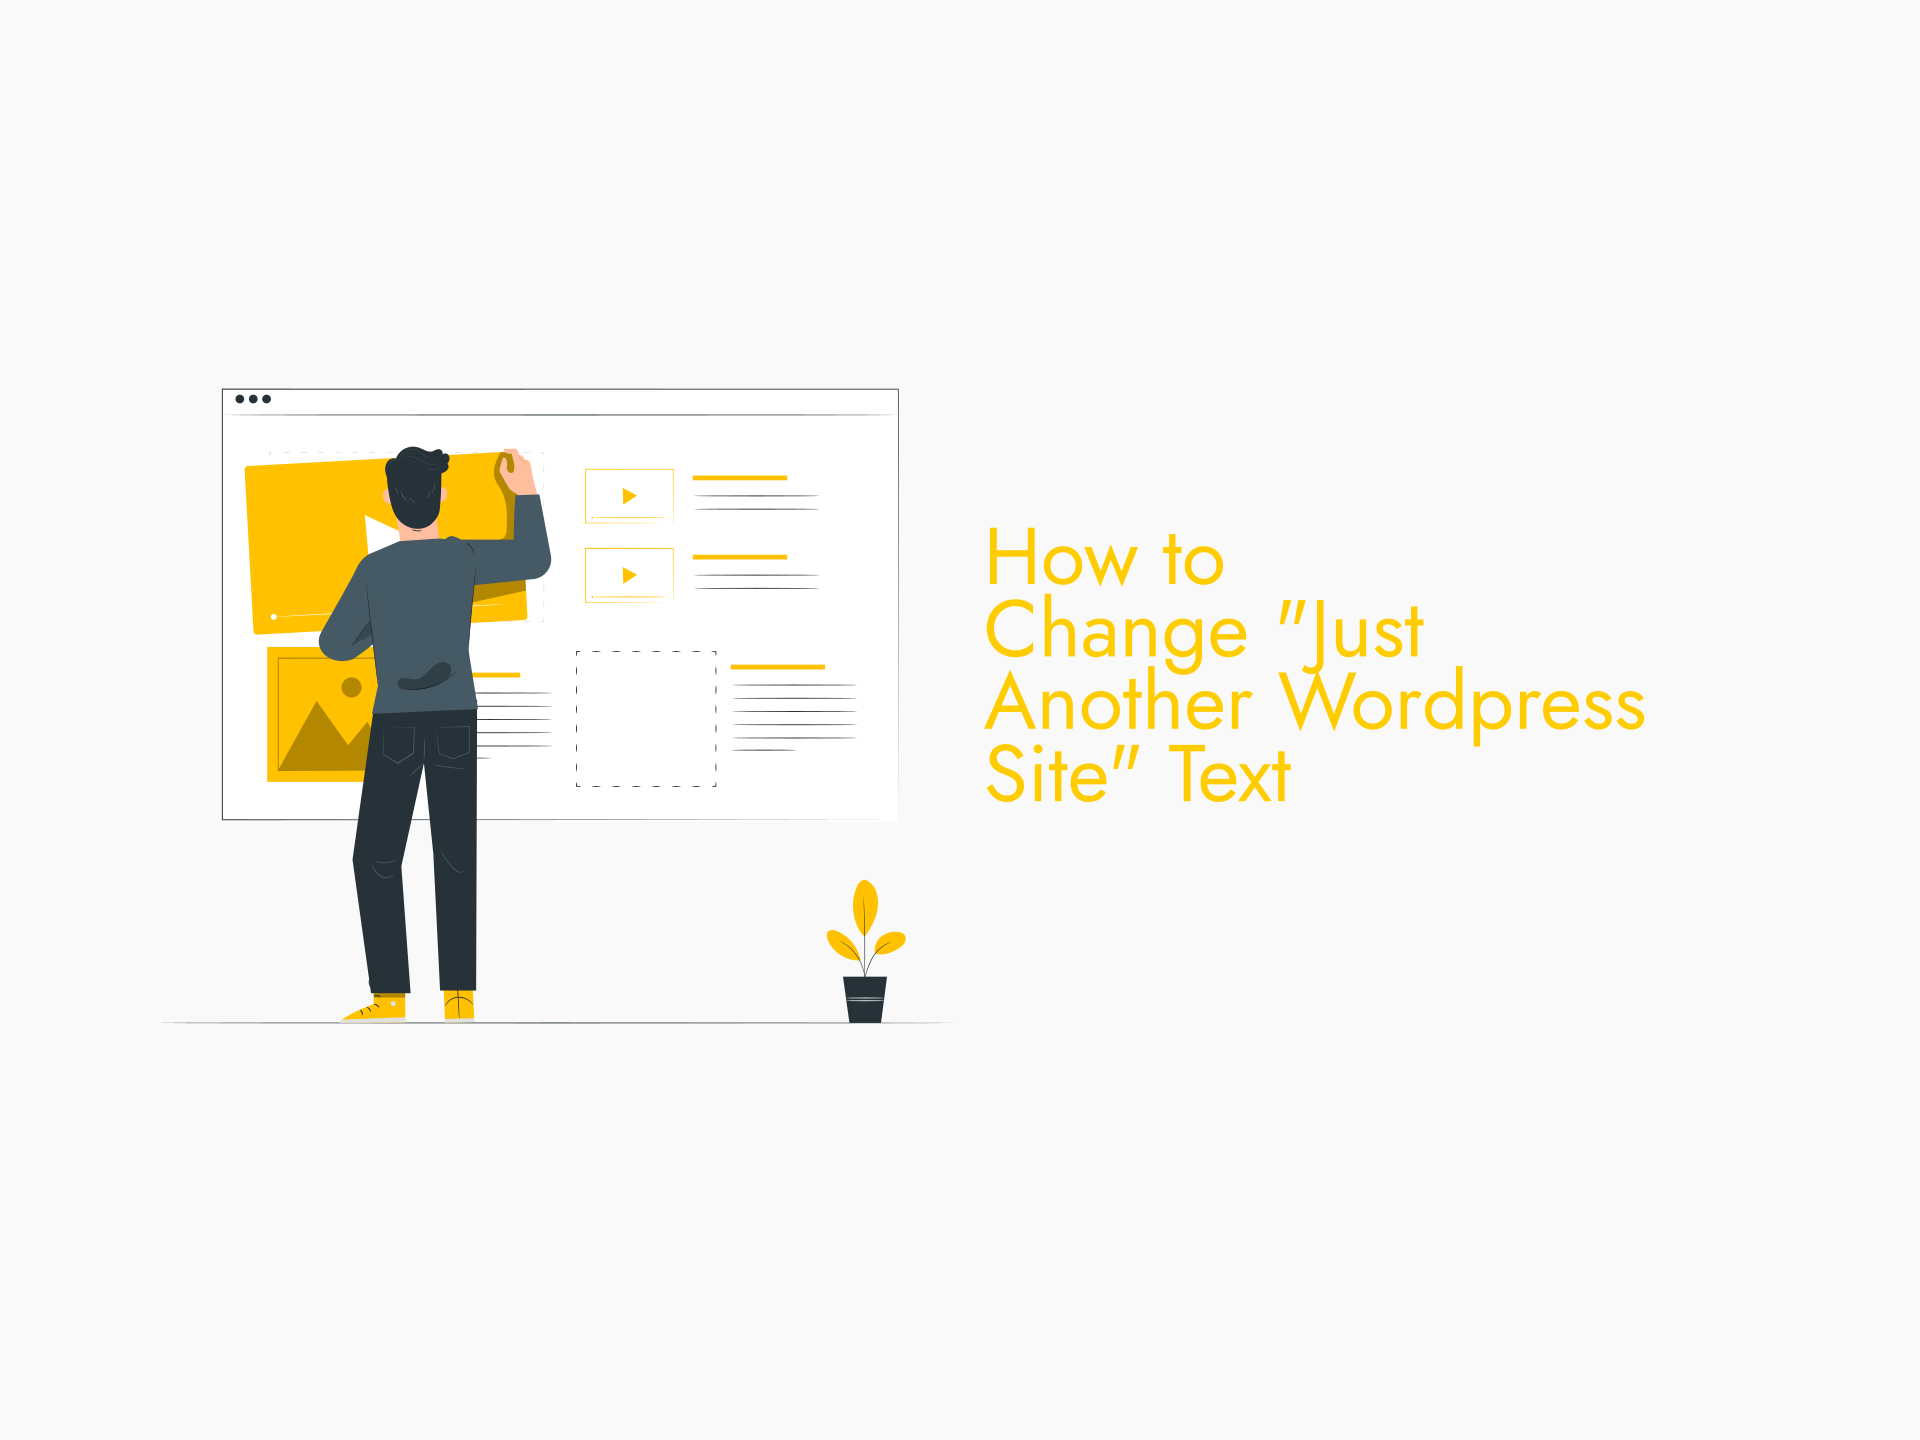 How to Change “Just Another WordPress Site” Text